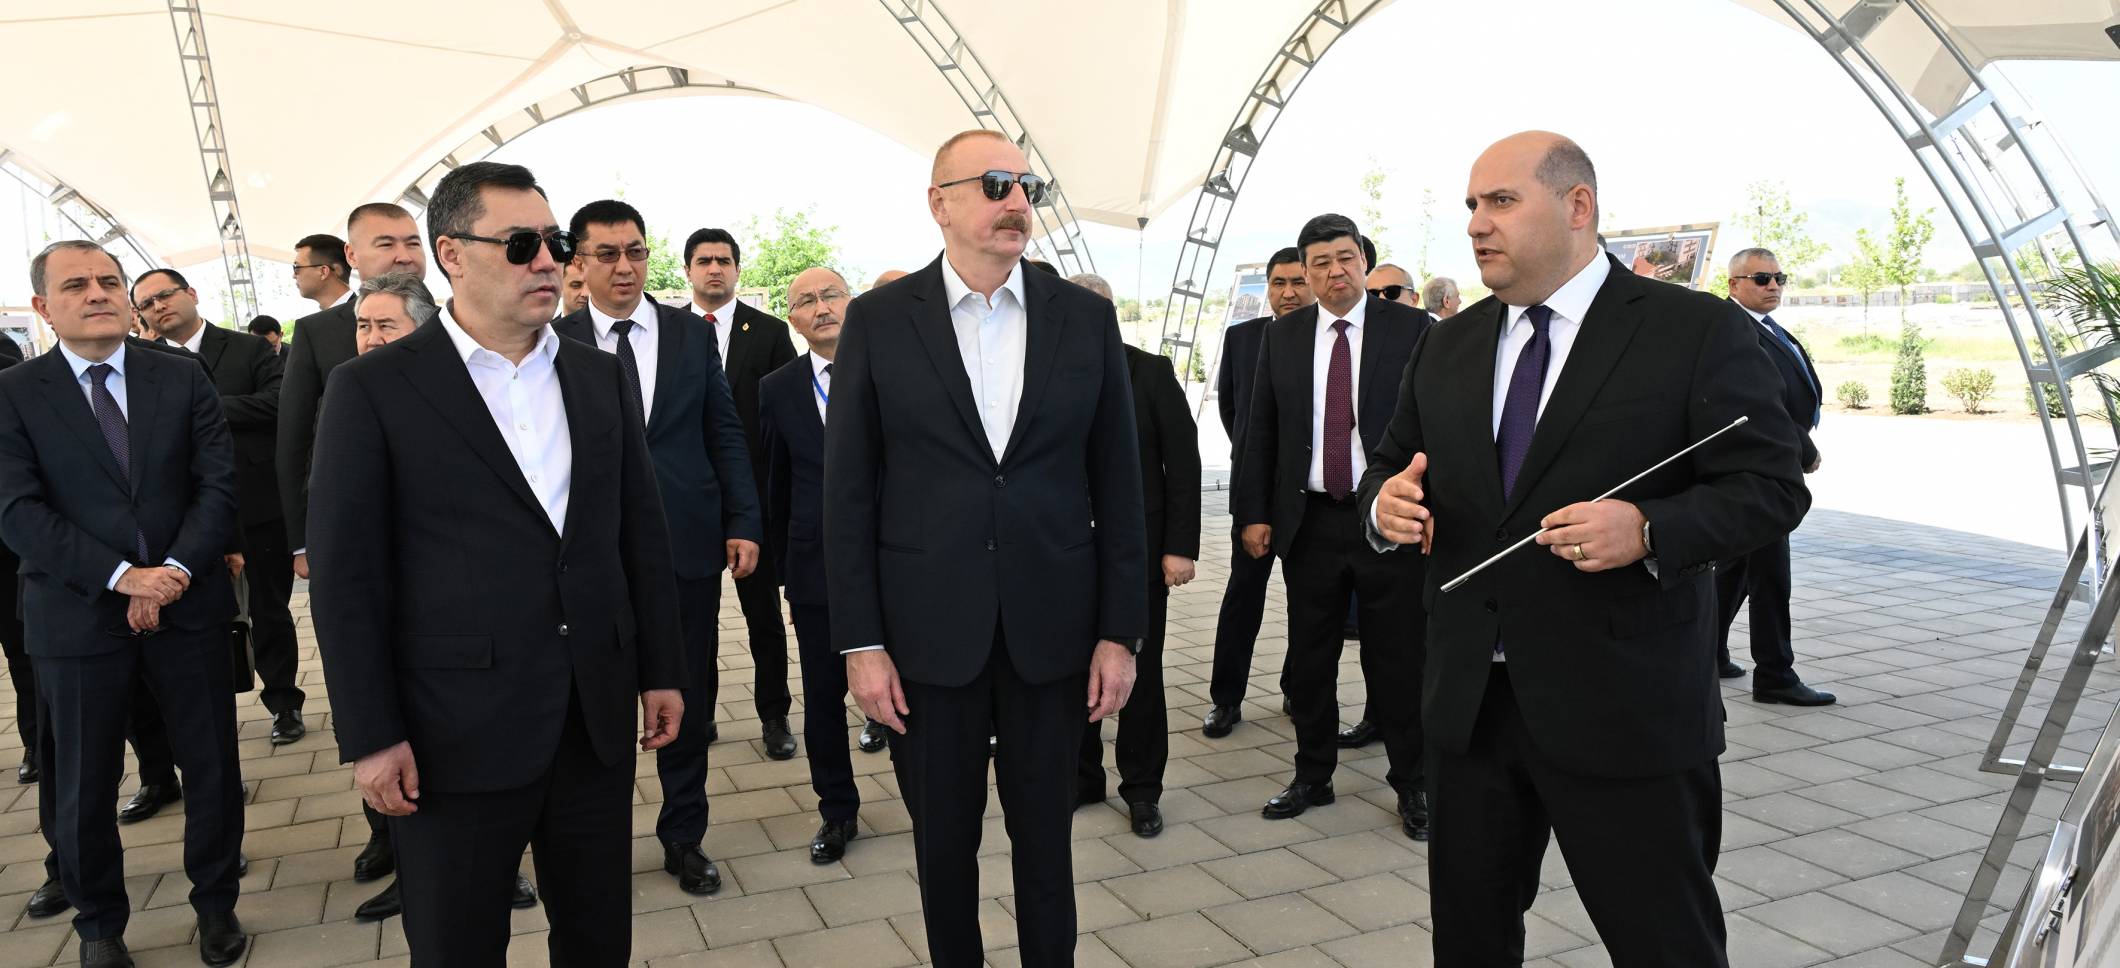 Presidents of Azerbaijan and Kyrgyzstan visited the city of Aghdam